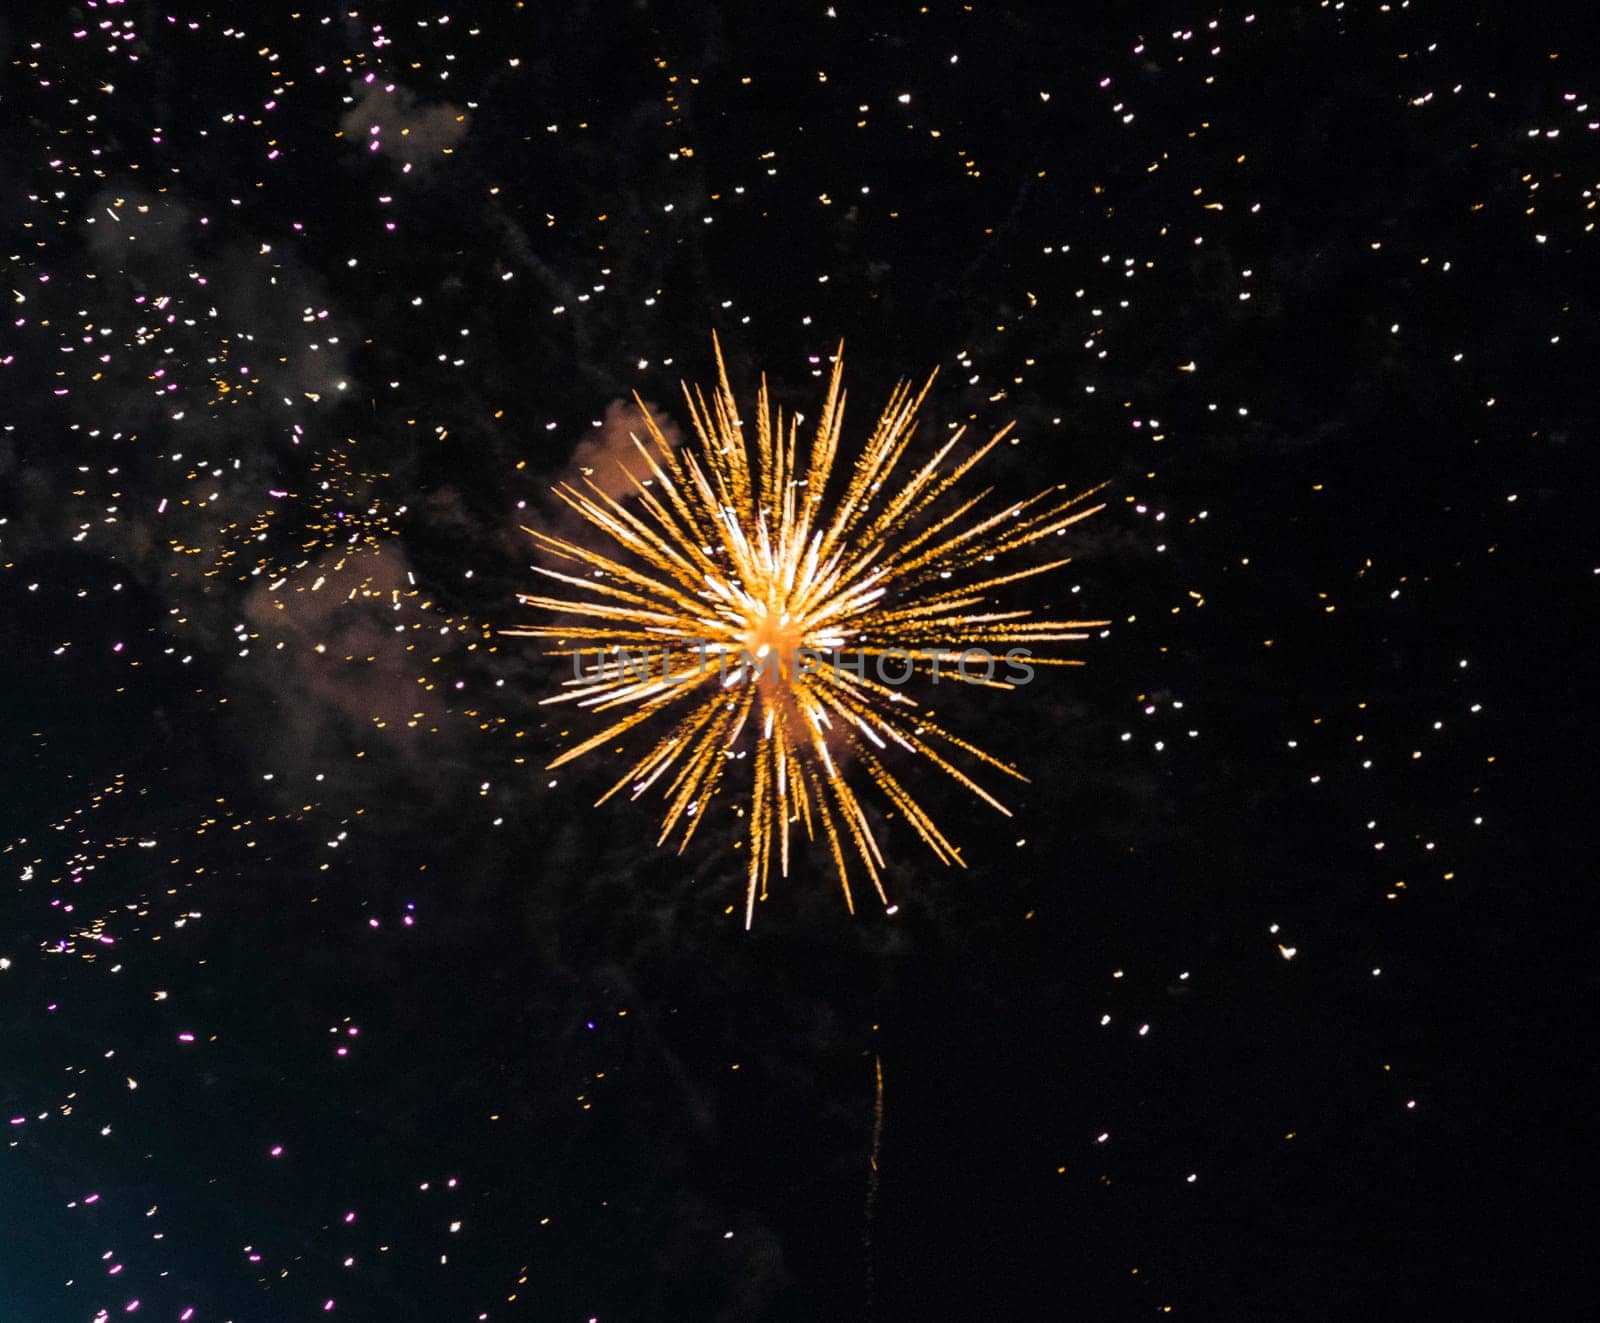 Shot of the fireworks in the night sky